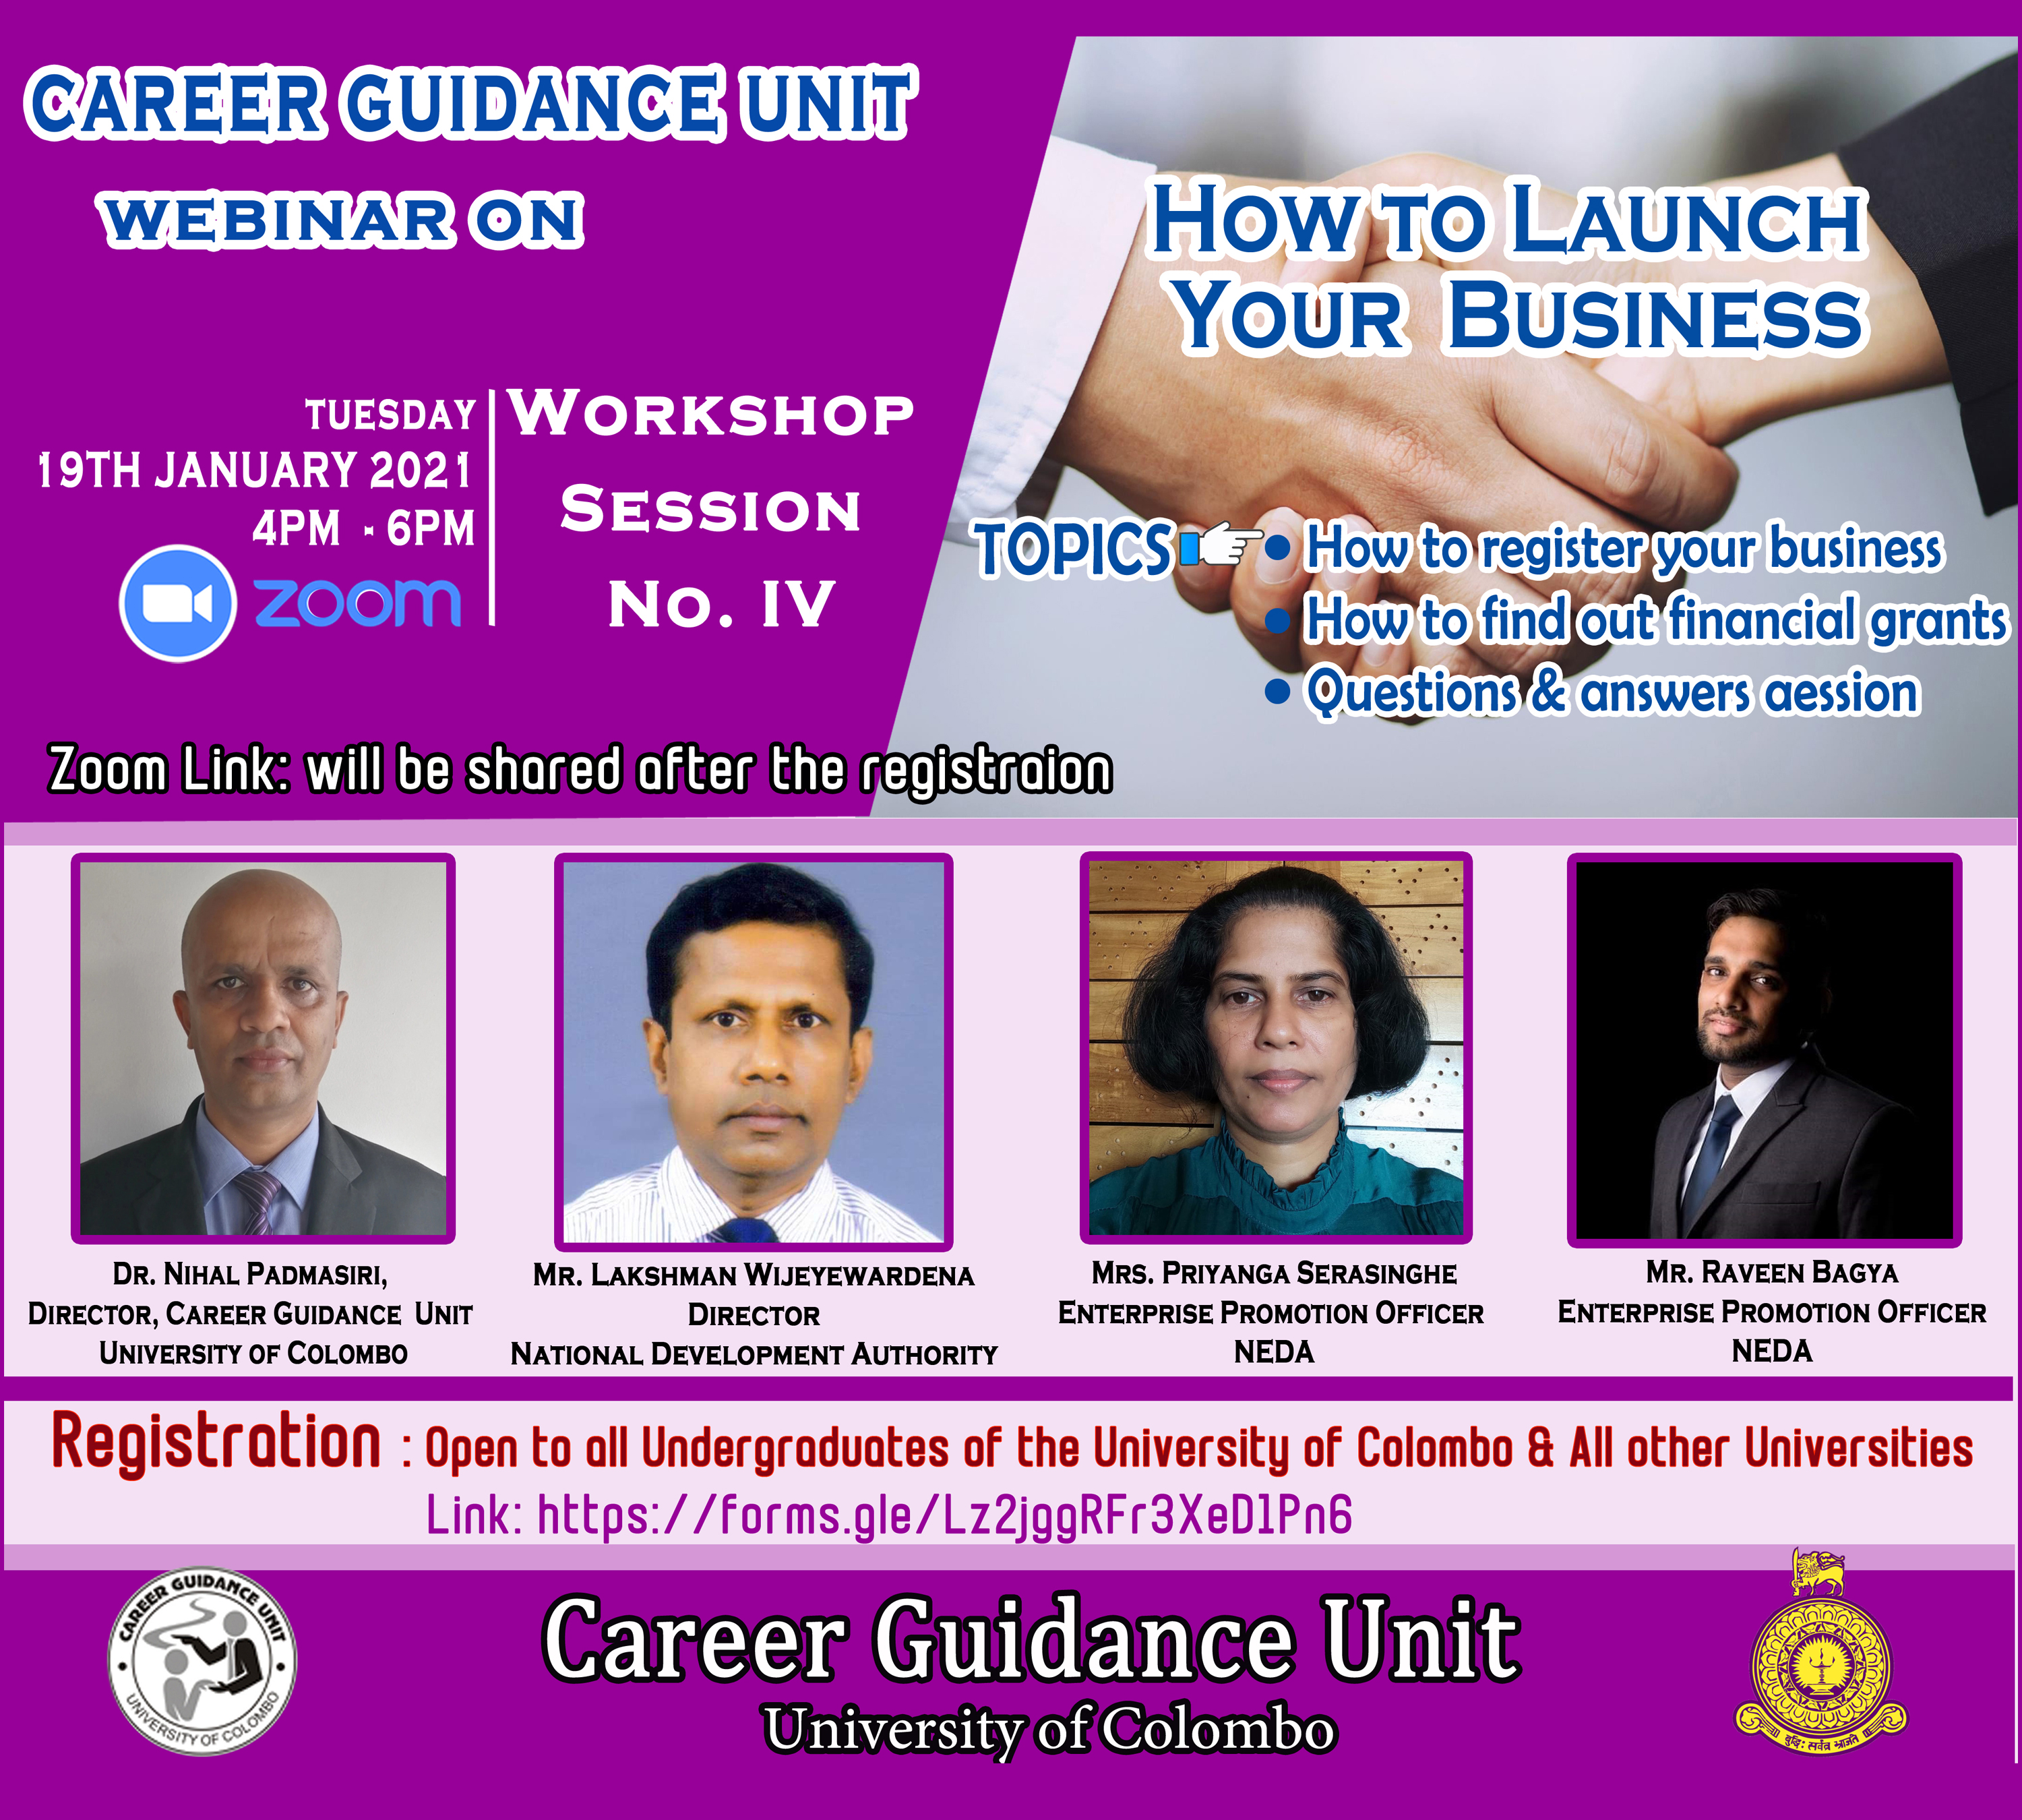 Webinar on: How to Launch Your Business